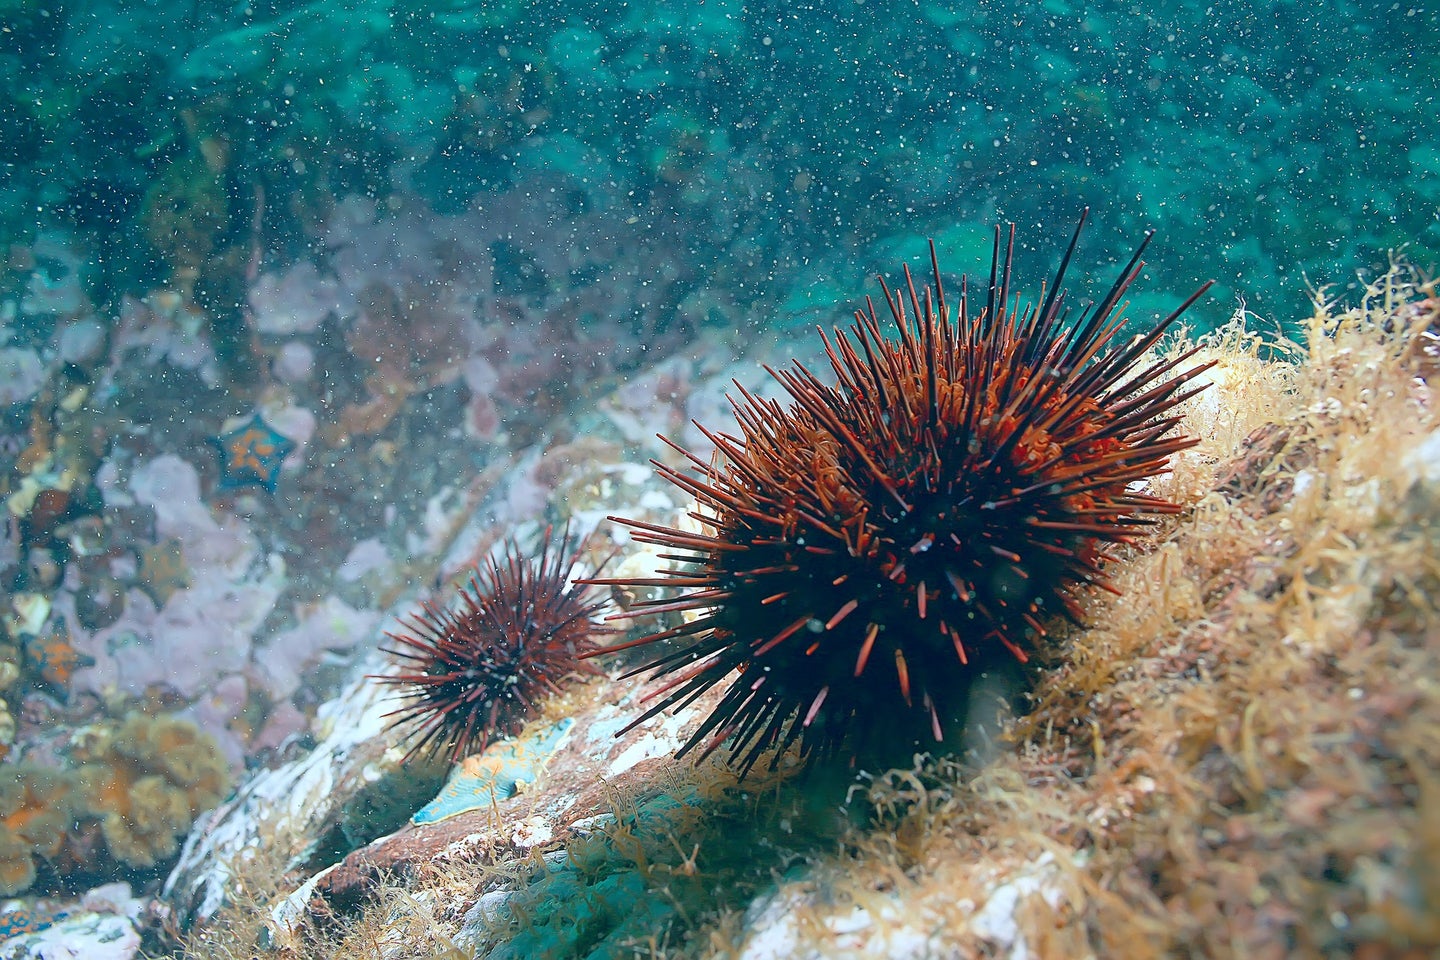 Purple sea urchins underwater releasing eggs and sperms during the mating process